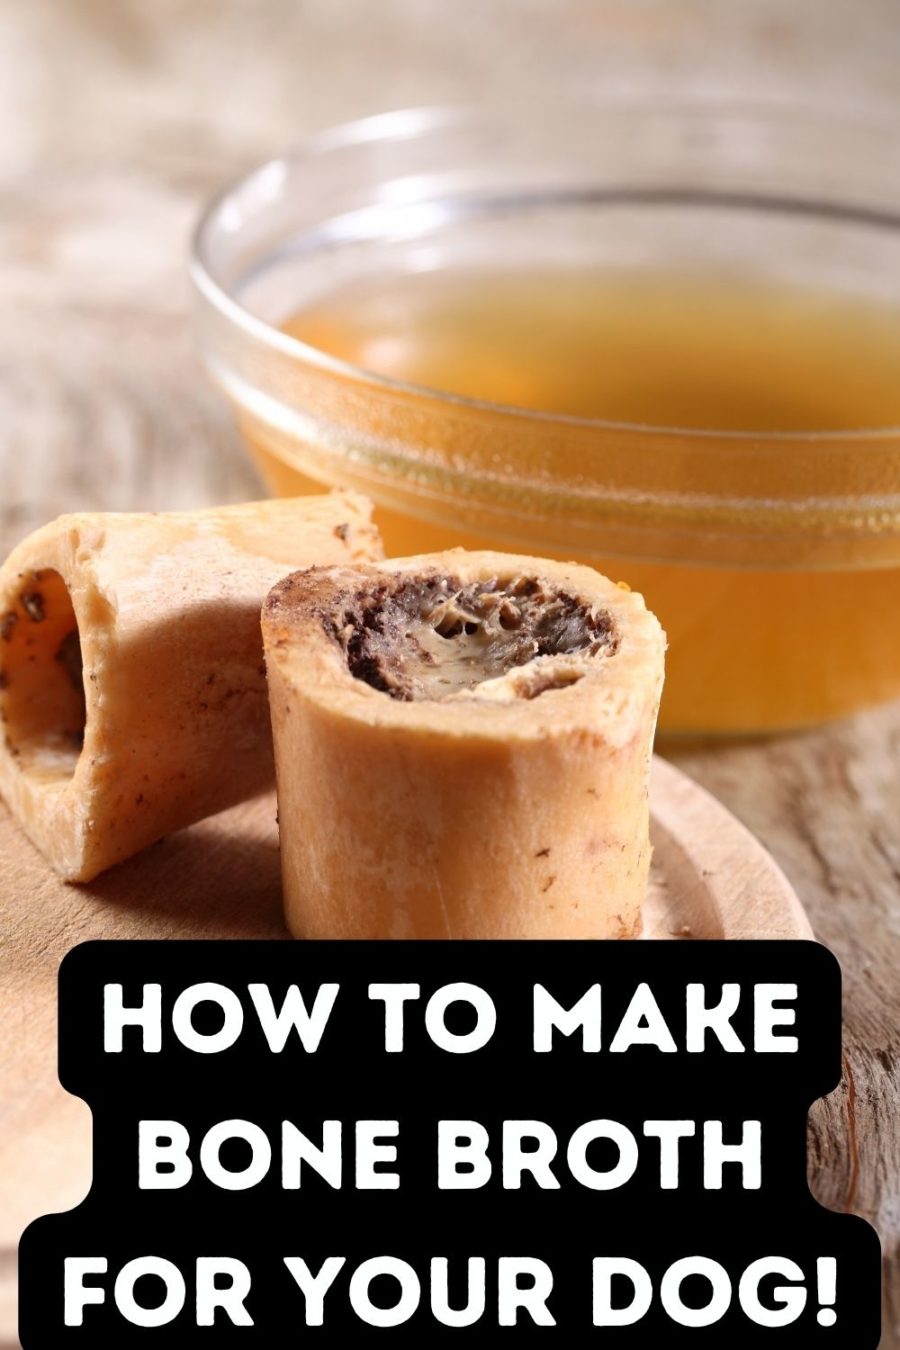 How to Make Bone Broth for Dogs {for pennies a serving!}